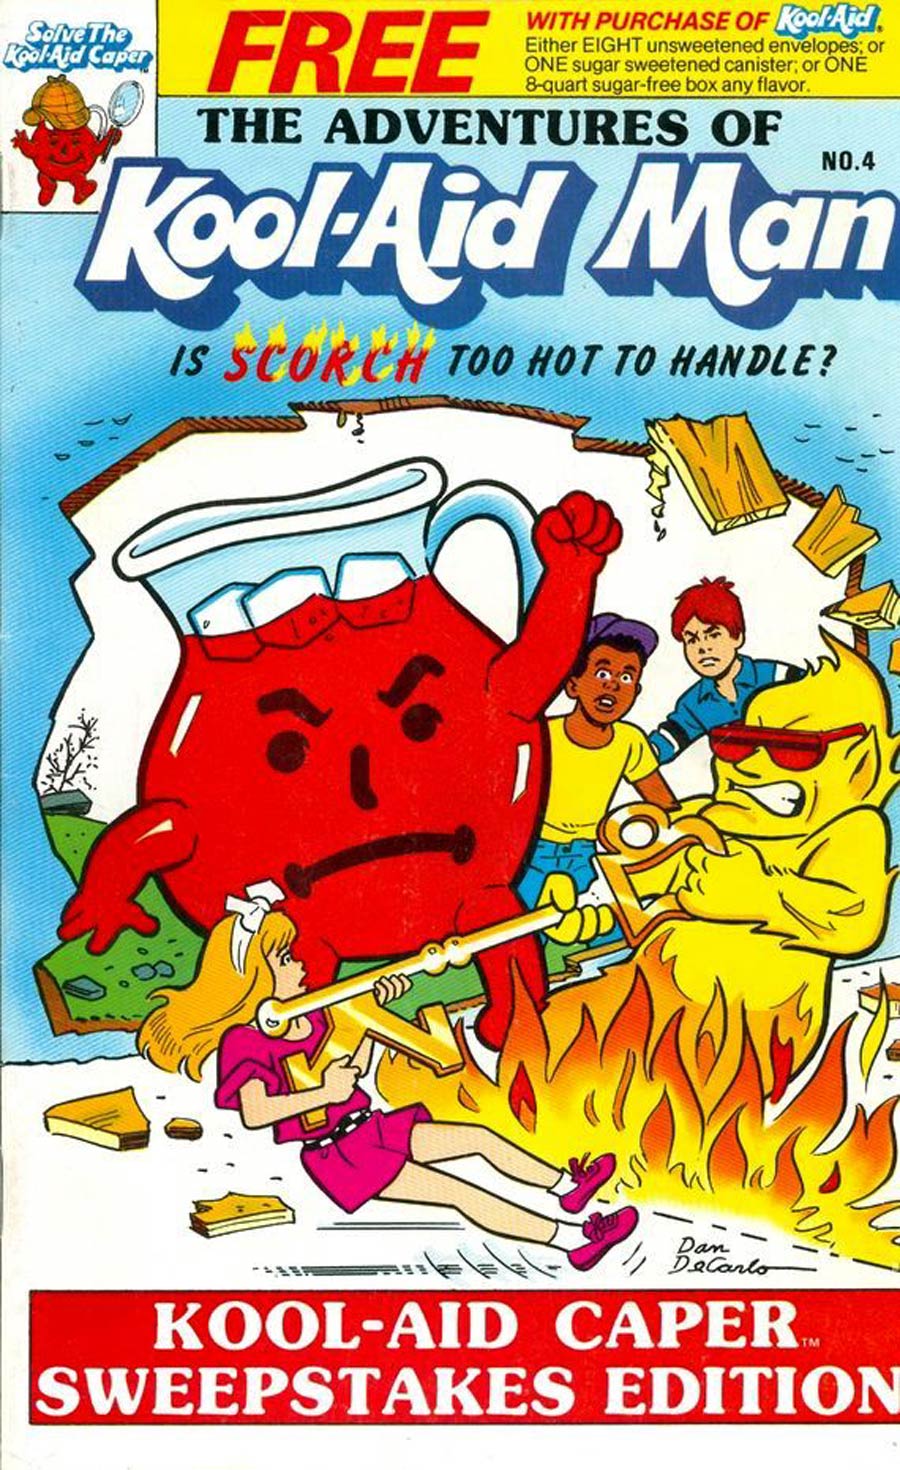 Adventures of Kool-Aid Man #4 Cover C Free Edition